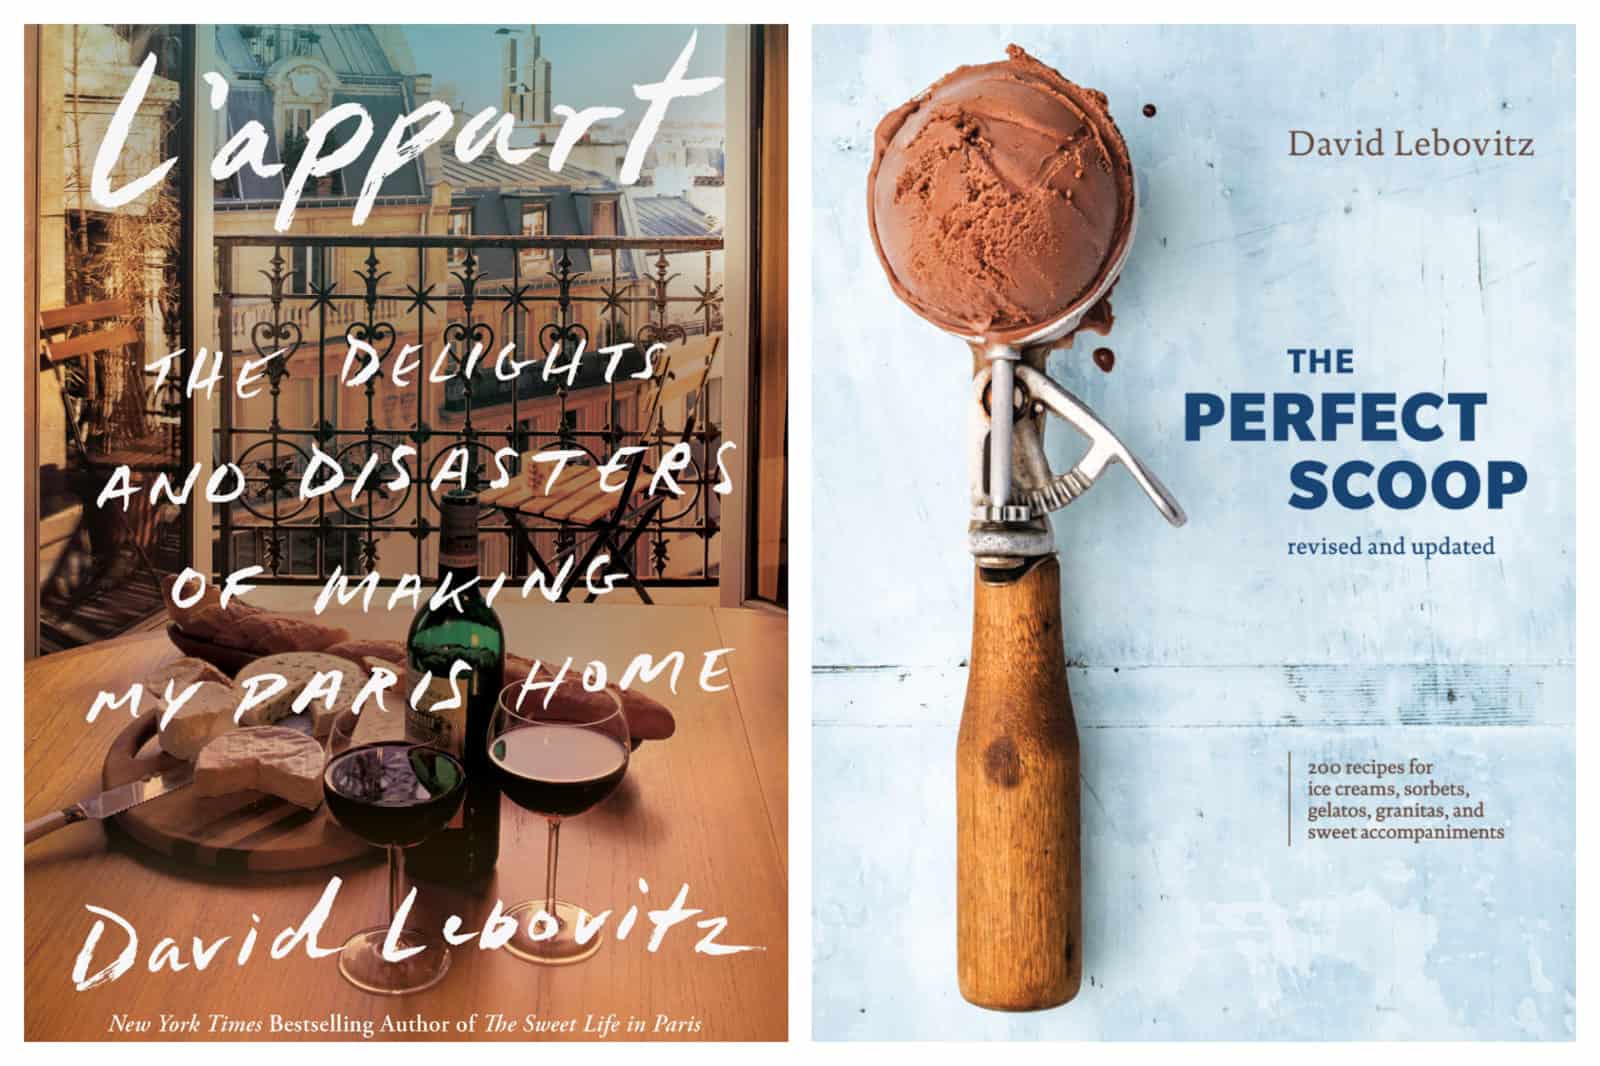 Author David Lebovitz's books about living in Paris are among our favorites, including 'L'Appart, the Delights and Disaster of Making Paris My Home' (left). And 'The Perfect Scoop' that has 200 recipes for ice cream and sorbets (right).